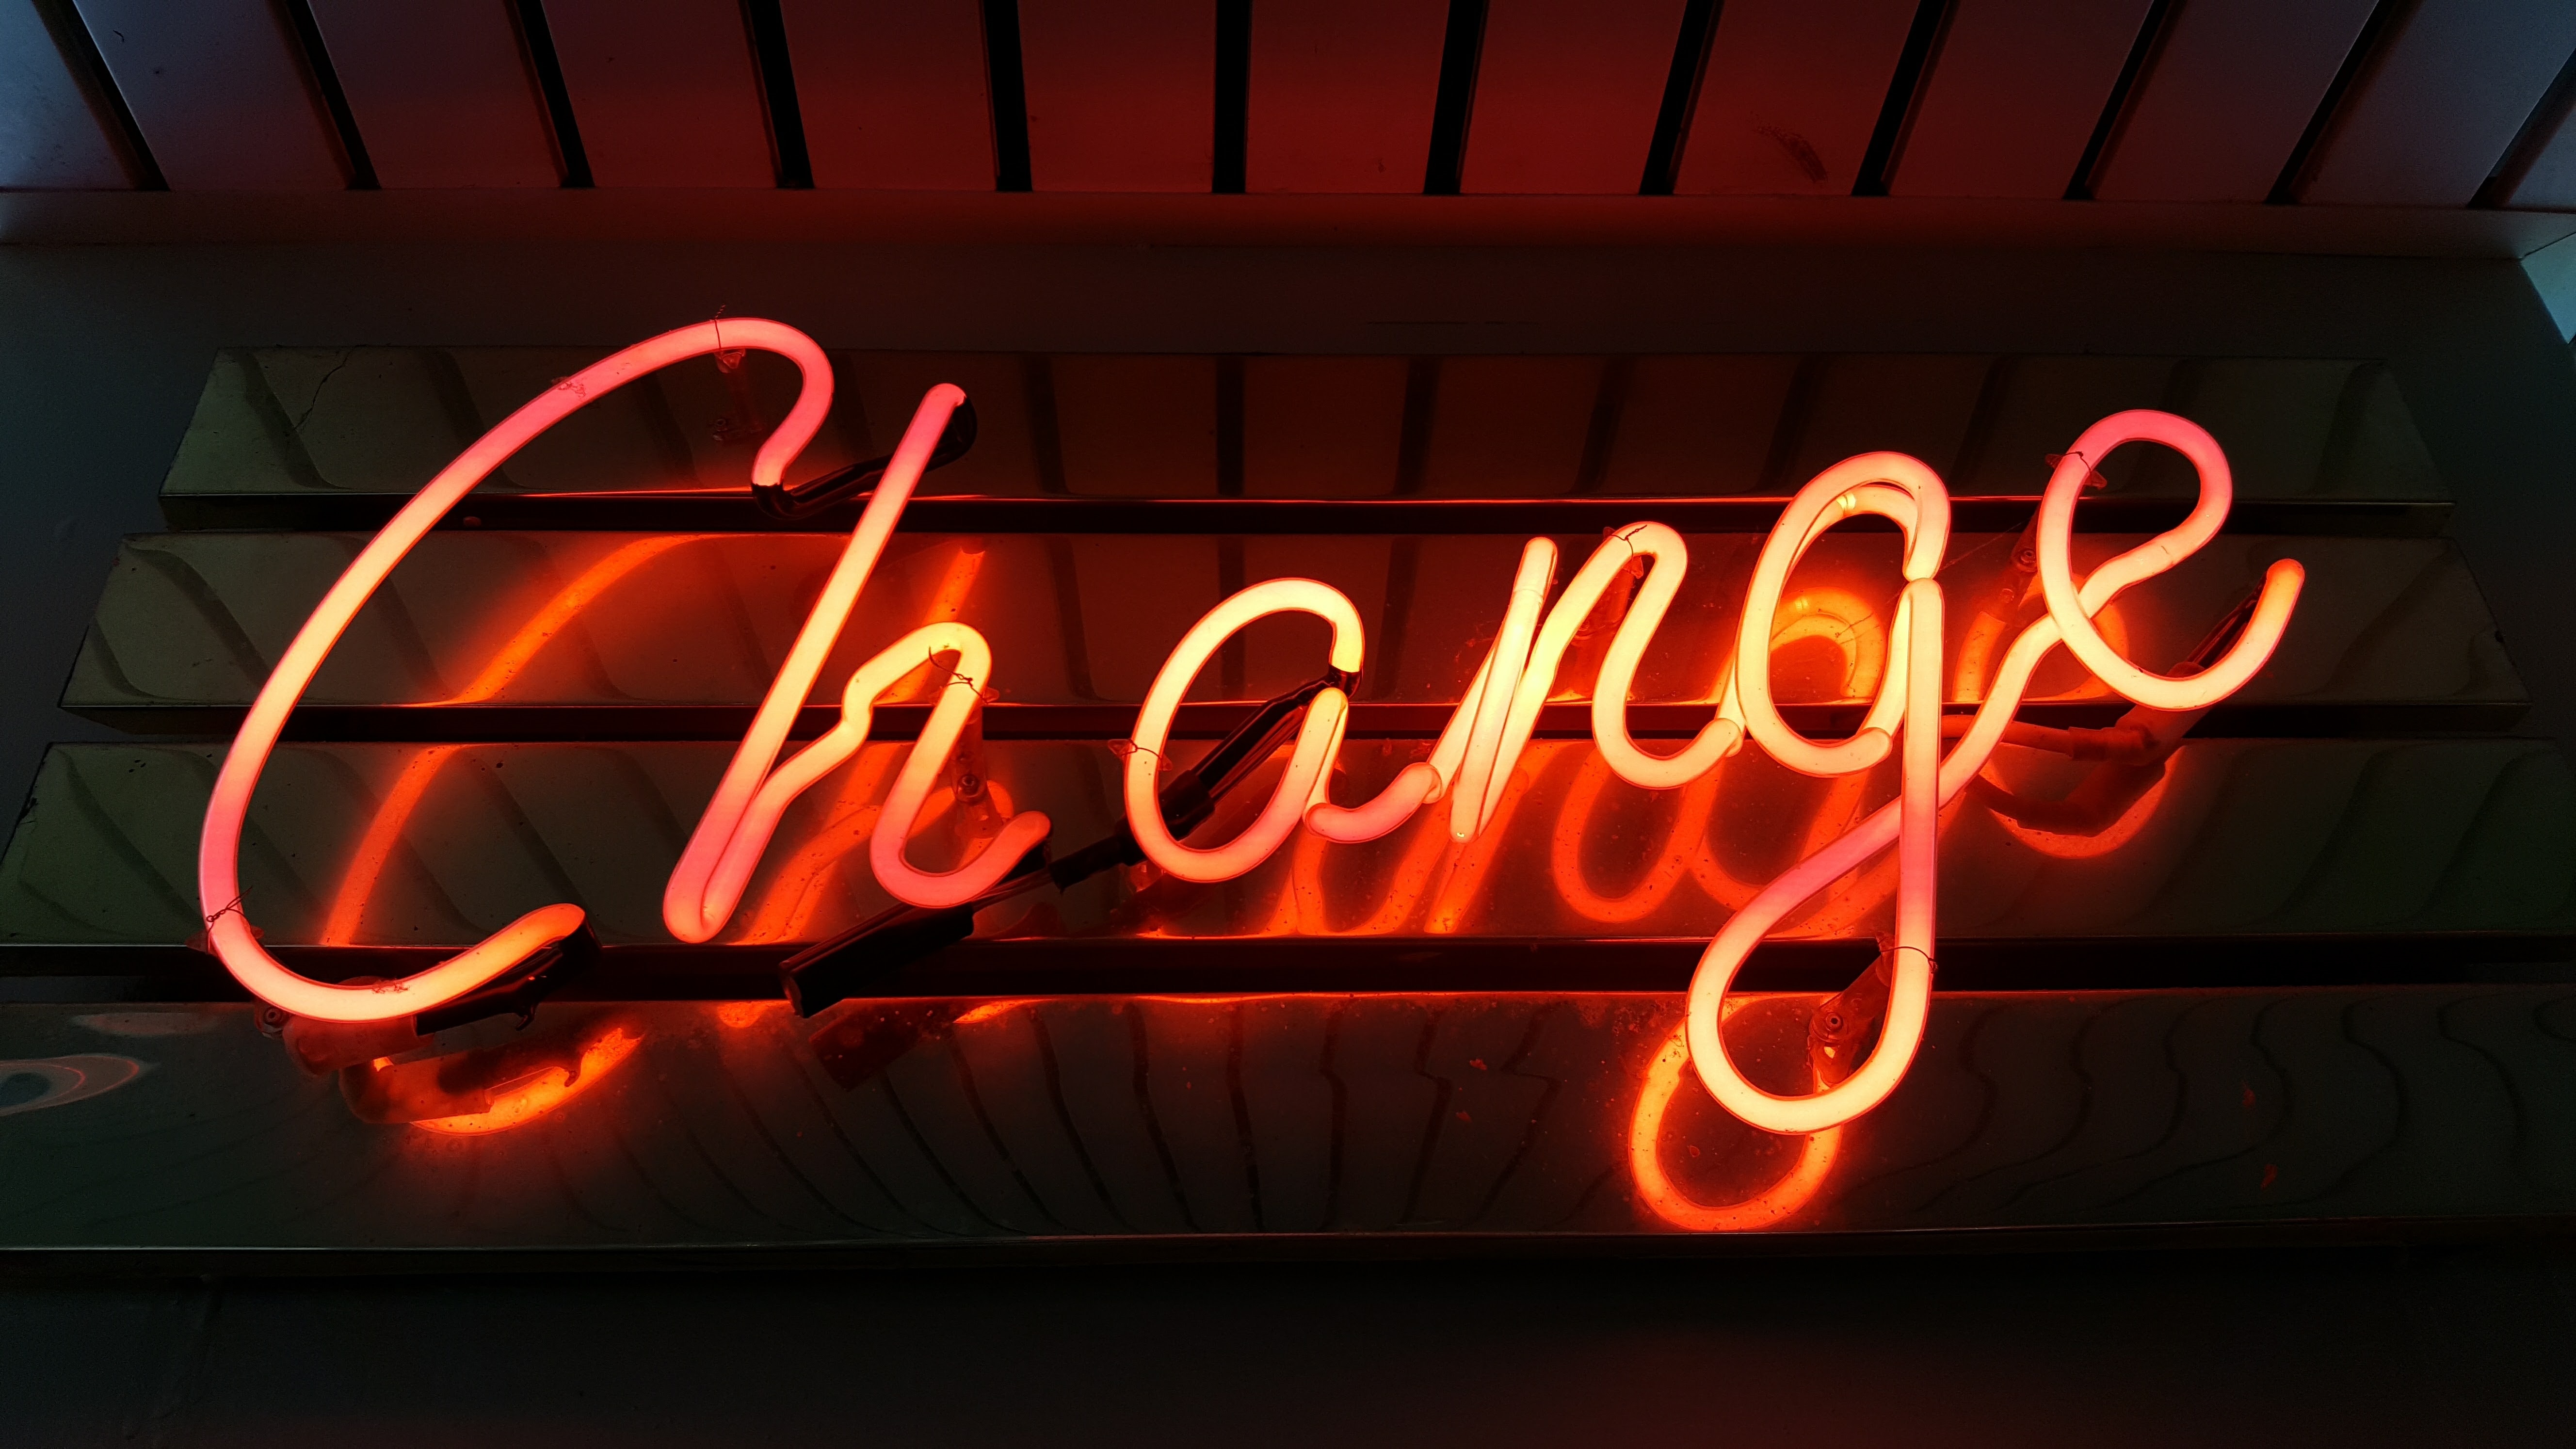 Are You Ready For Change Spark Crowdfunding blog